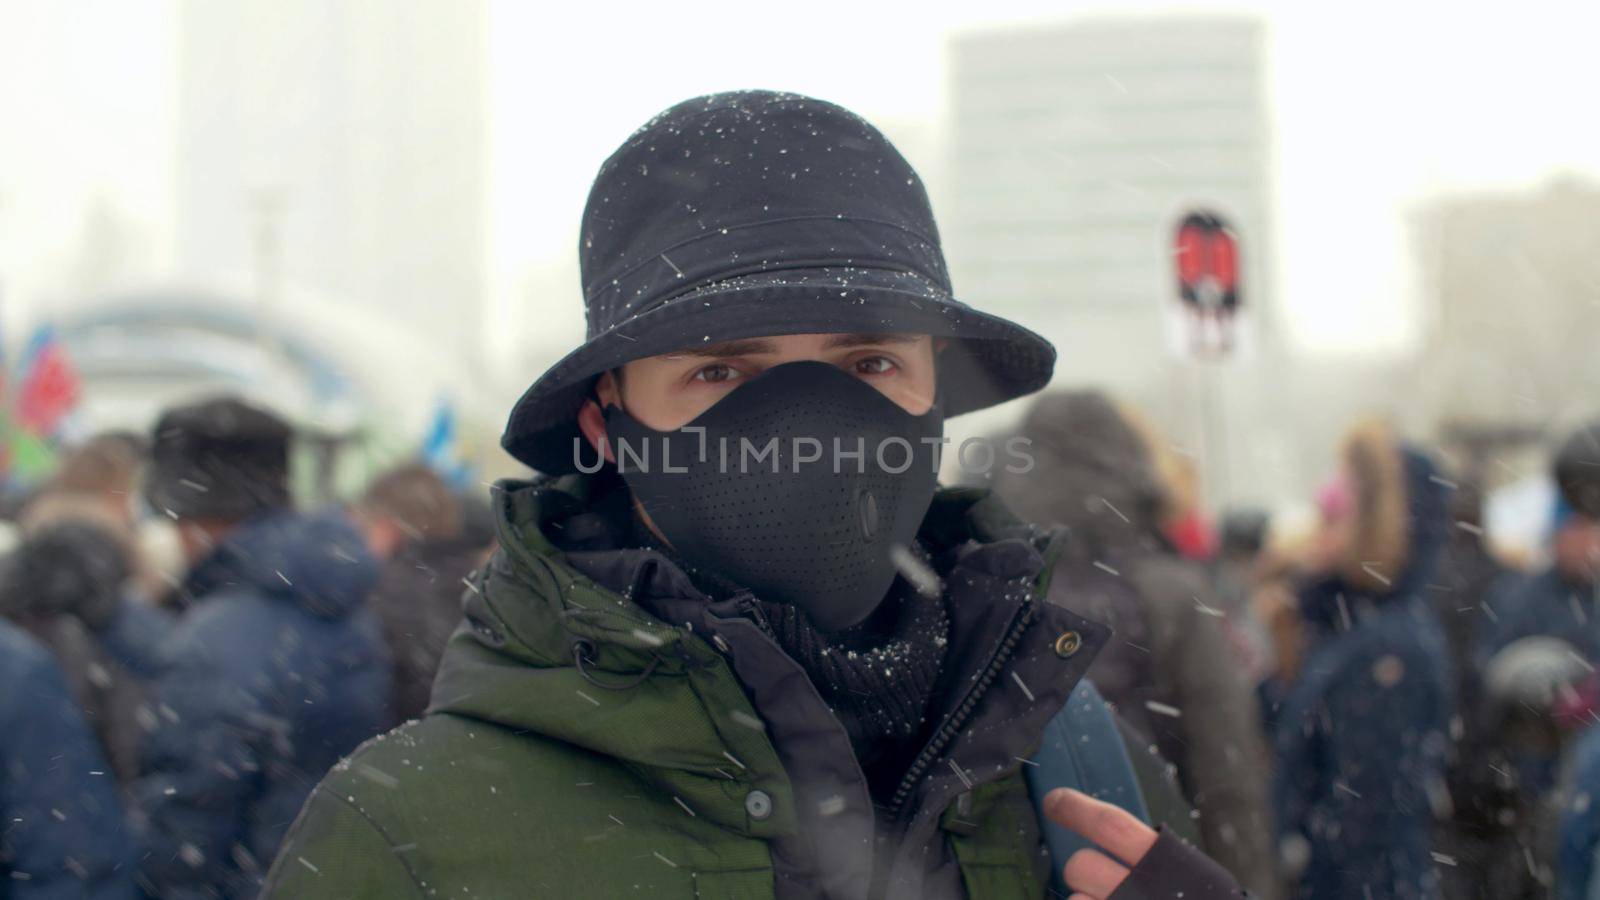 Close up portrait of a man wearing special protective mask on background of the rally crowd. Coronavirus epidemic in Moscow. Concept of health and safety life. COVID-19 pandemic